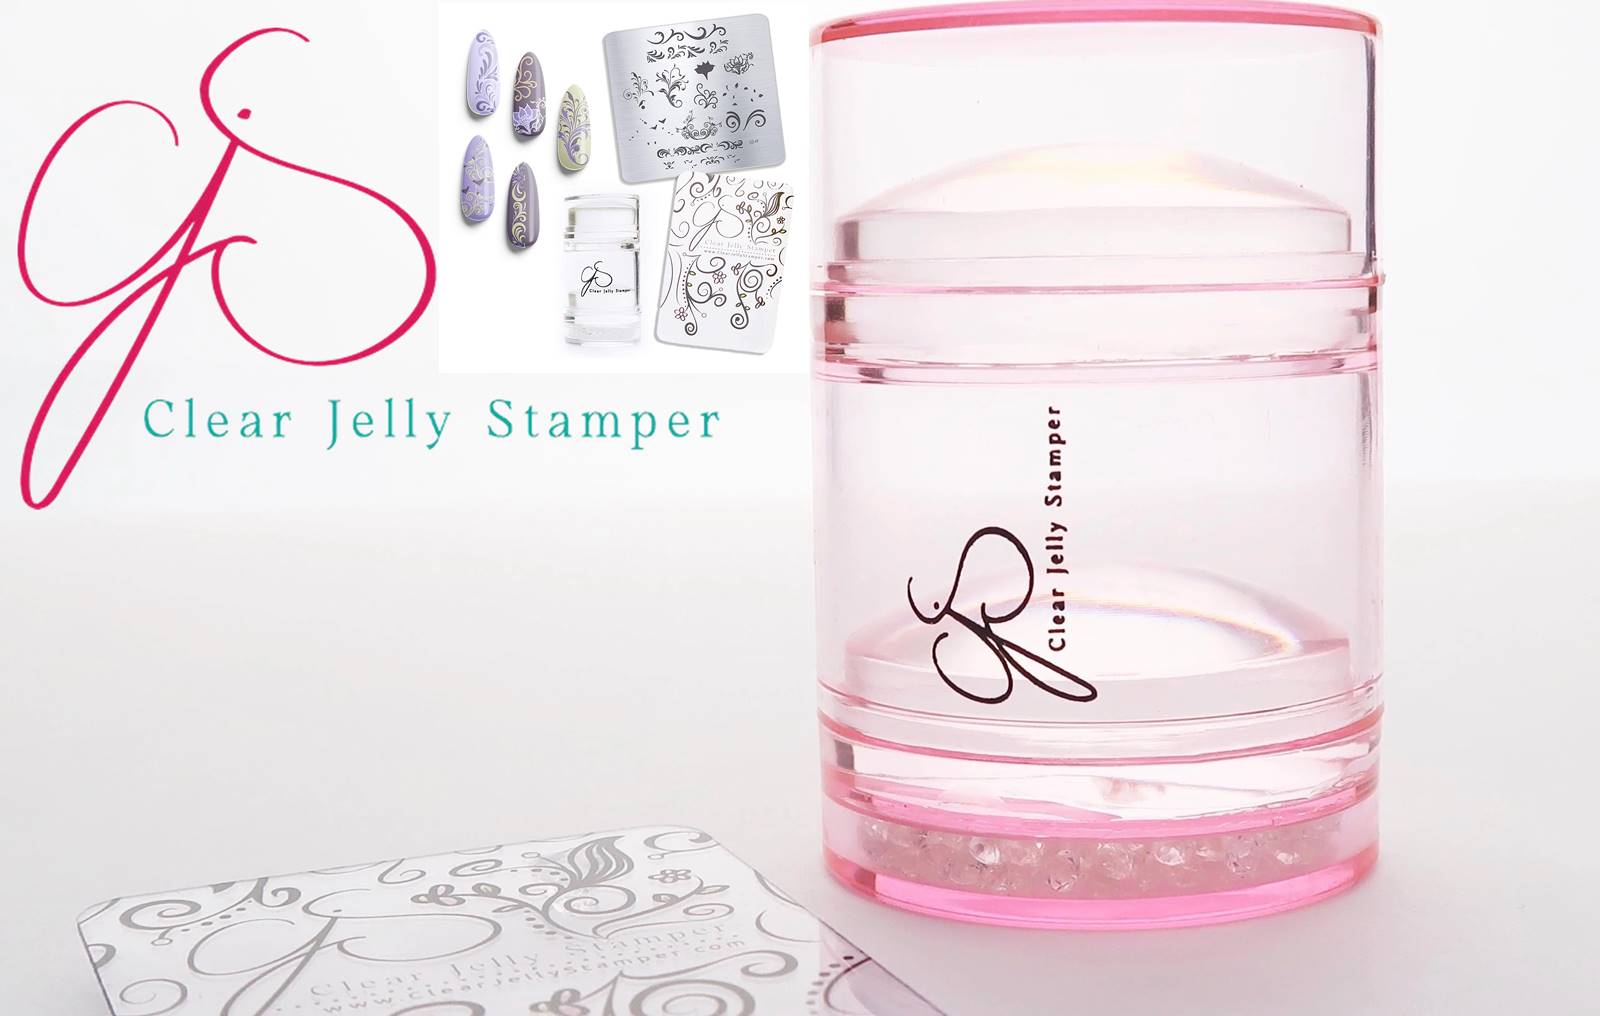 Clear Jelly Stamper - wide 4